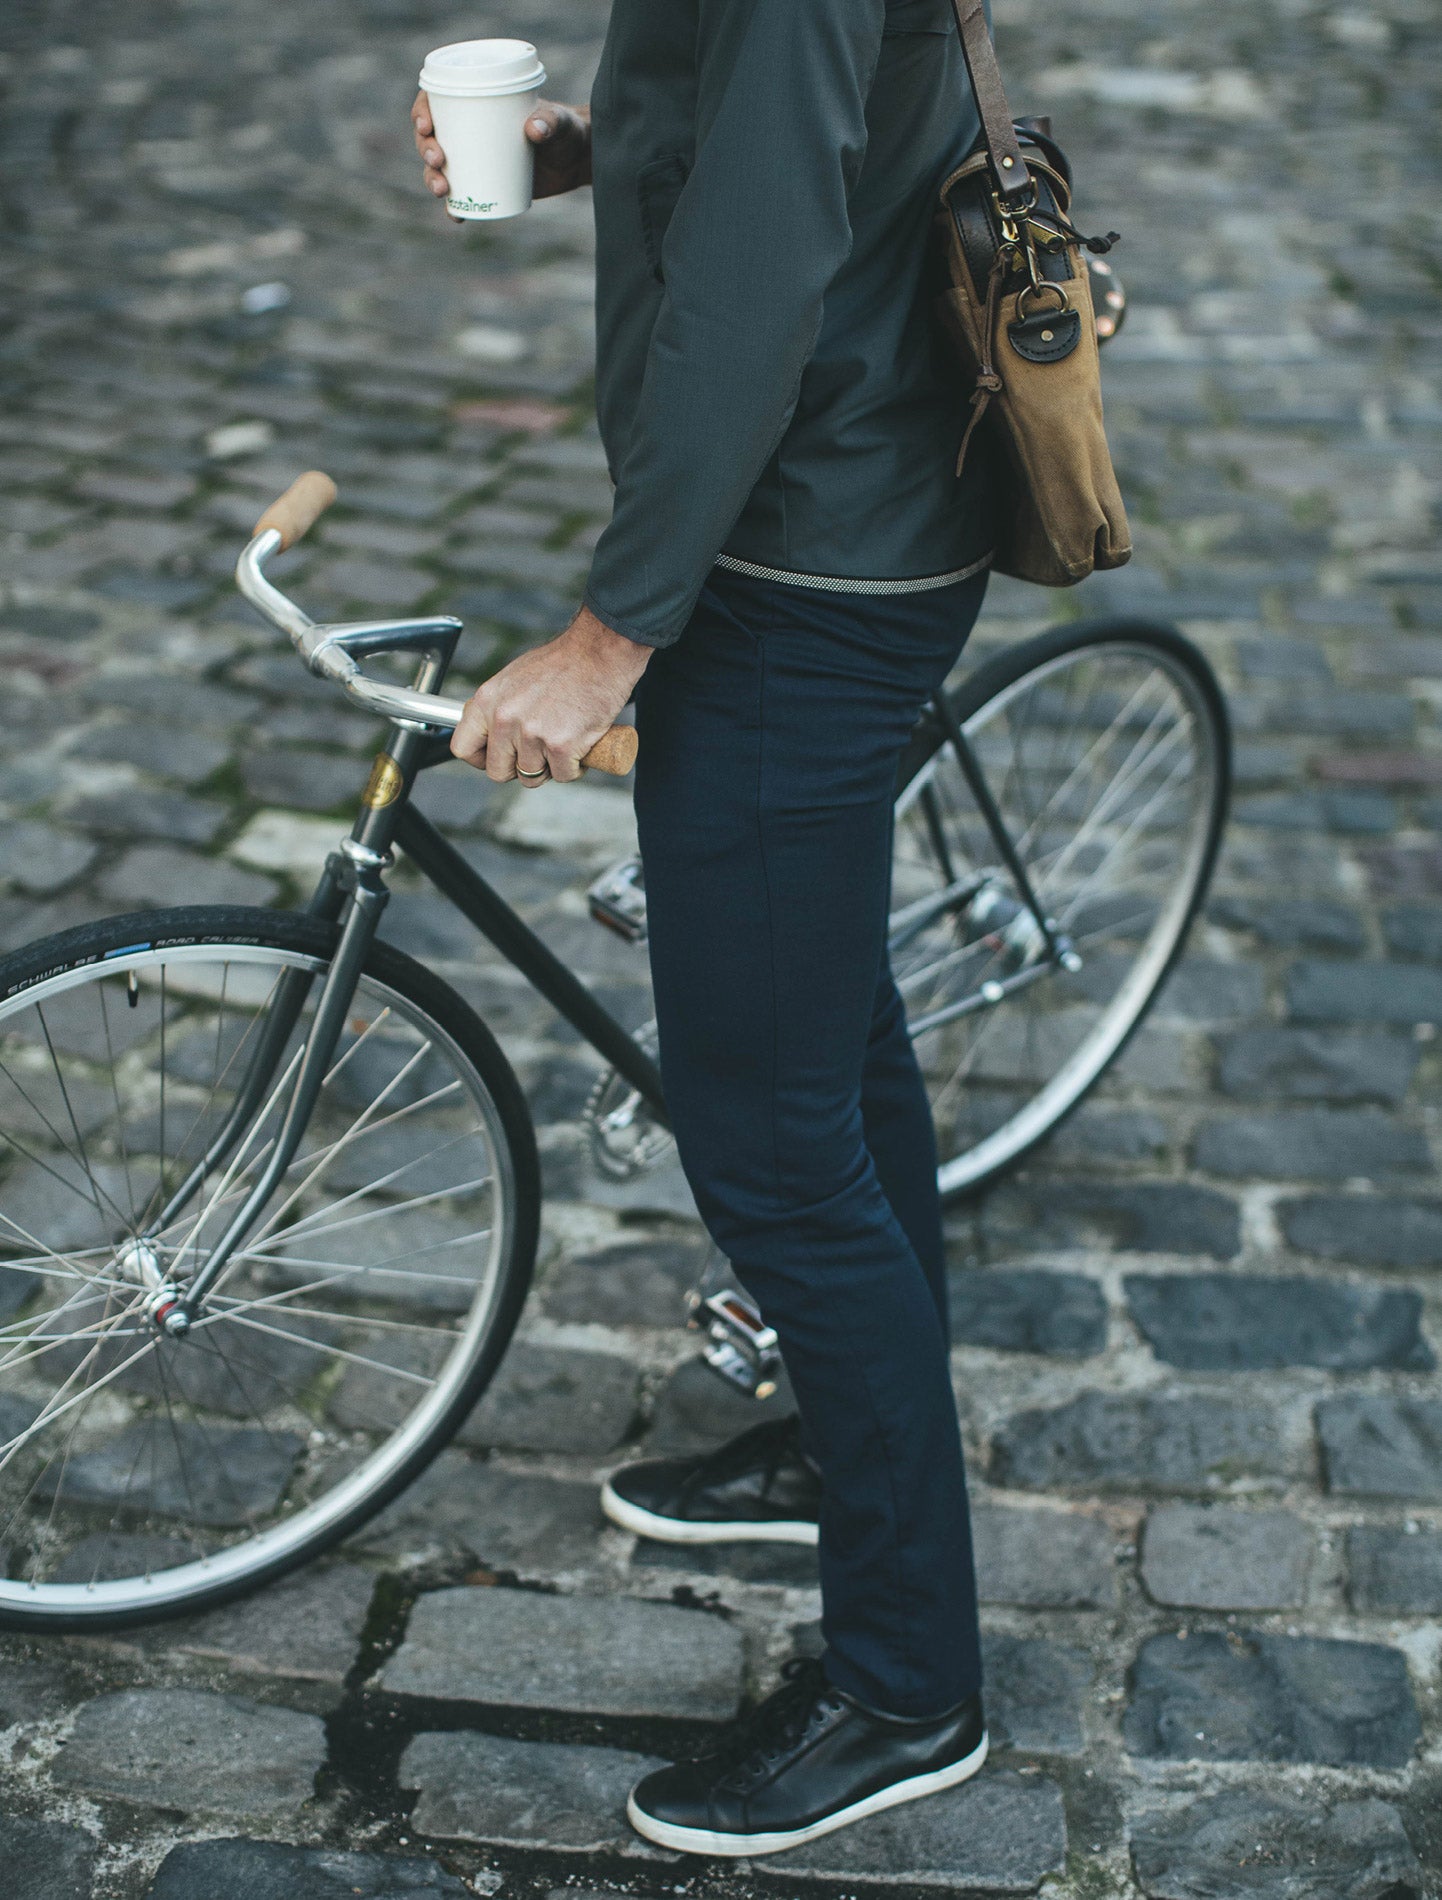 A gentleman stands with a bike. We know he's a gentleman because he's carrying a coffee — and wearing CIVIC.